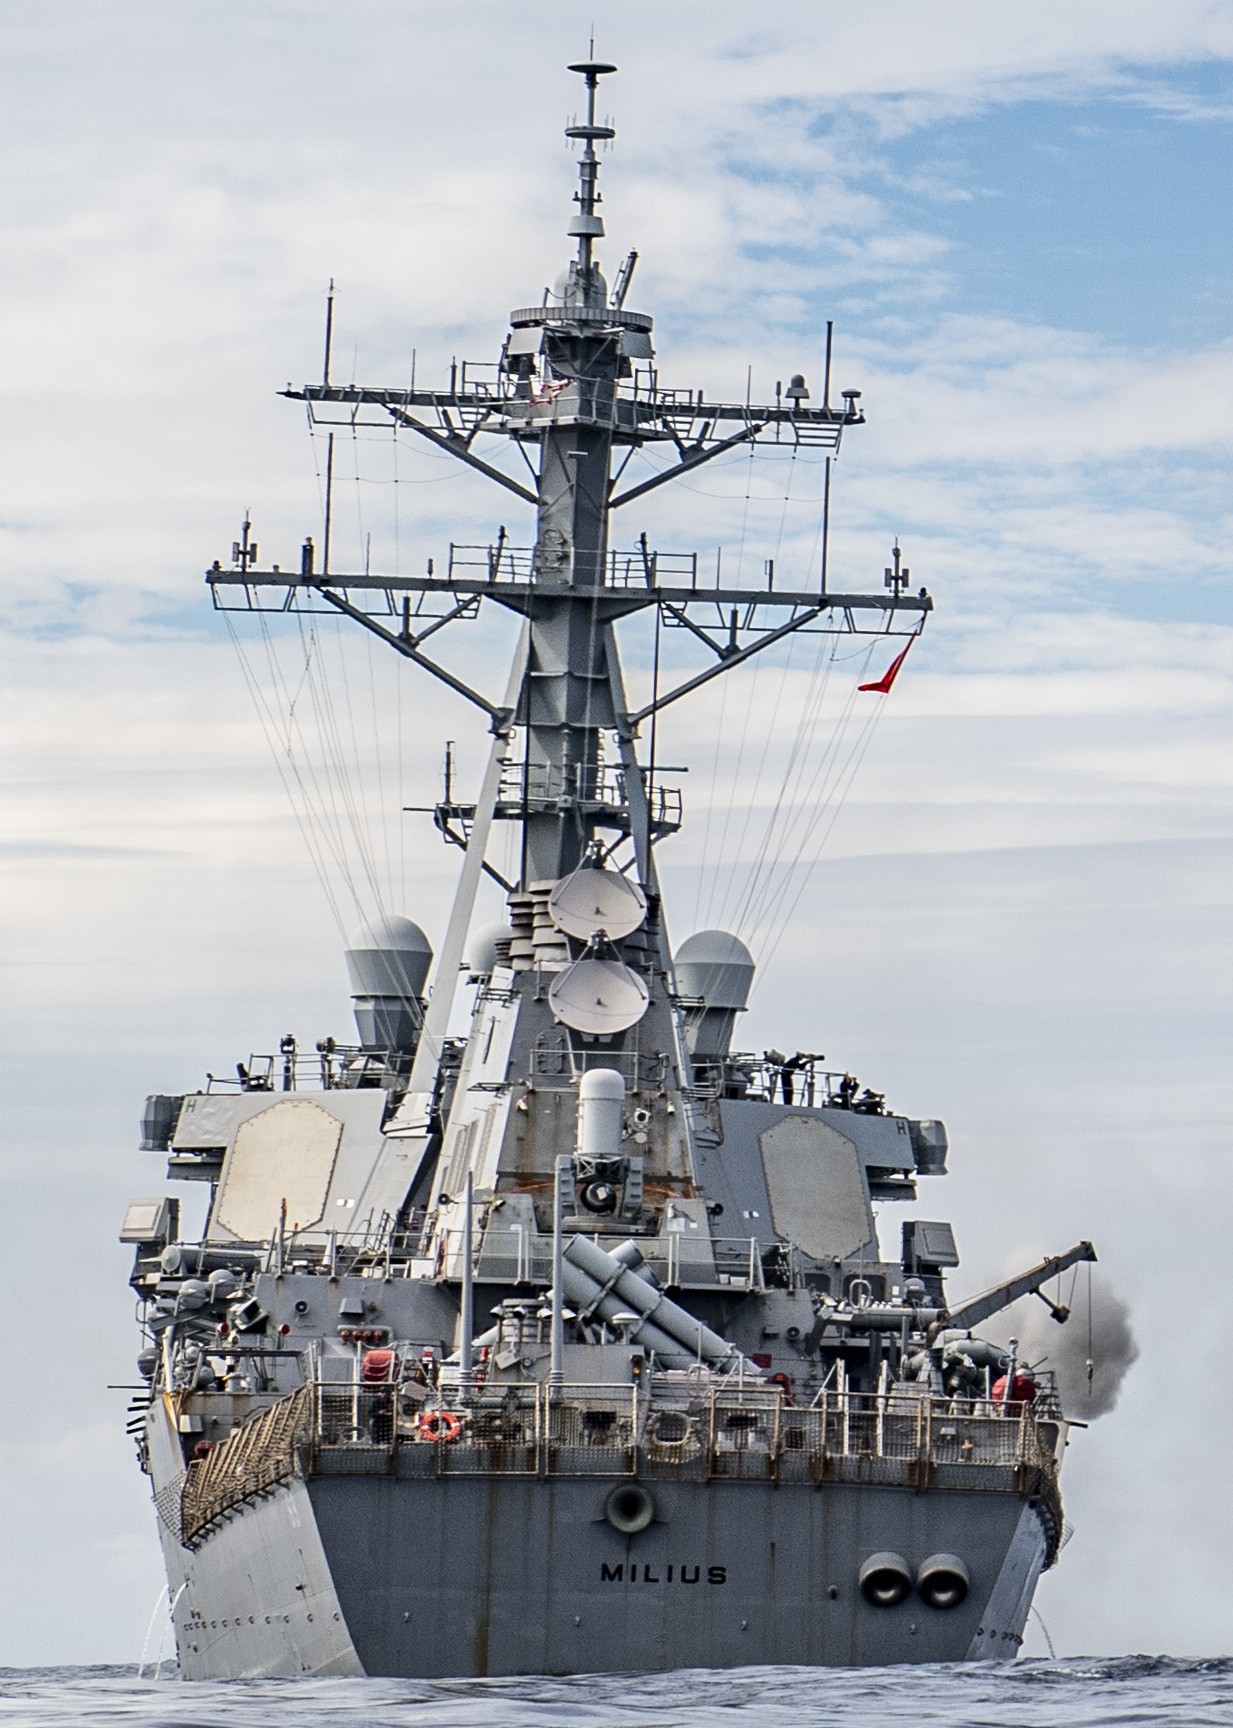 ddg-69 uss milius guided missile destroyer arleigh burke class aegis bmd 03 south china sea